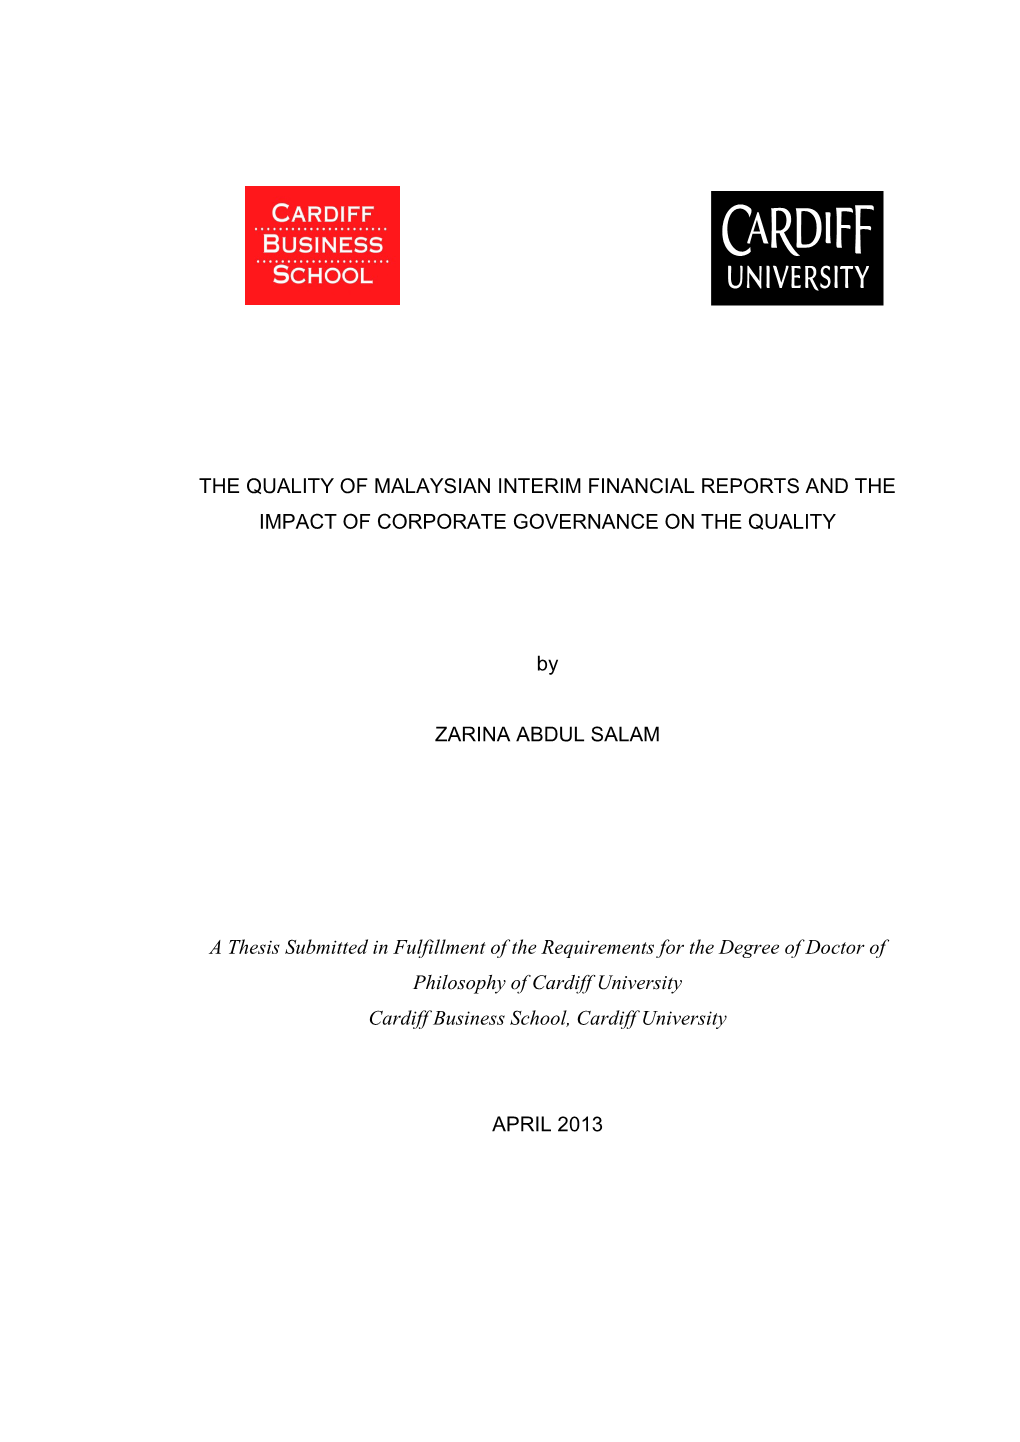 The Quality of Malaysian Interim Financial Reports and the Impact of Corporate Governance on the Quality